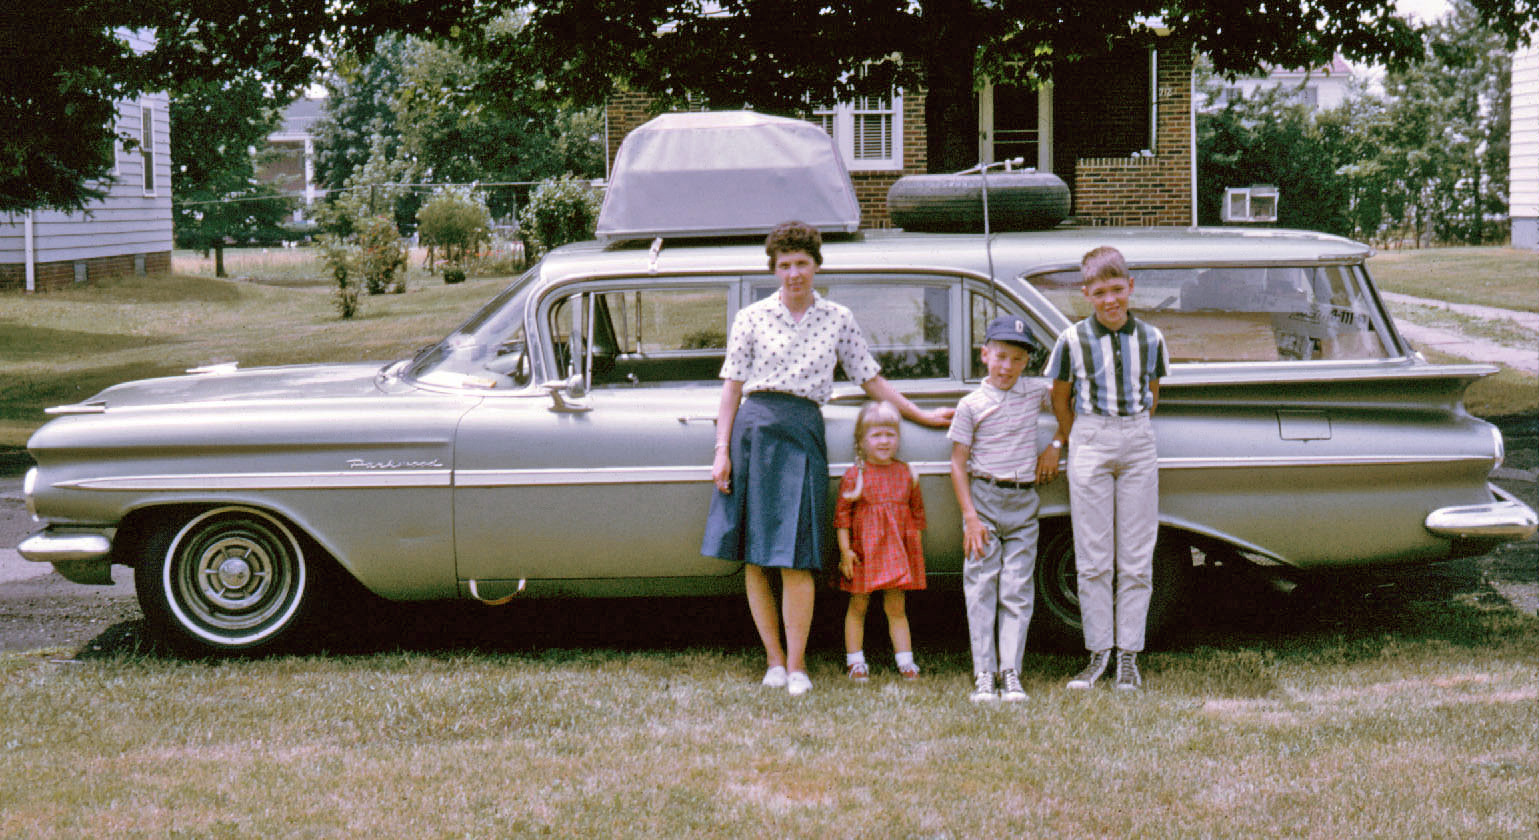 1969, heading from Akron, Ohio to Los Angeles for a wedding. The car broke down a mile into the trip and we had to tow it back with a '64 Dodge Dart.  We made it the next year, same car ... it was a great trip. View full size.